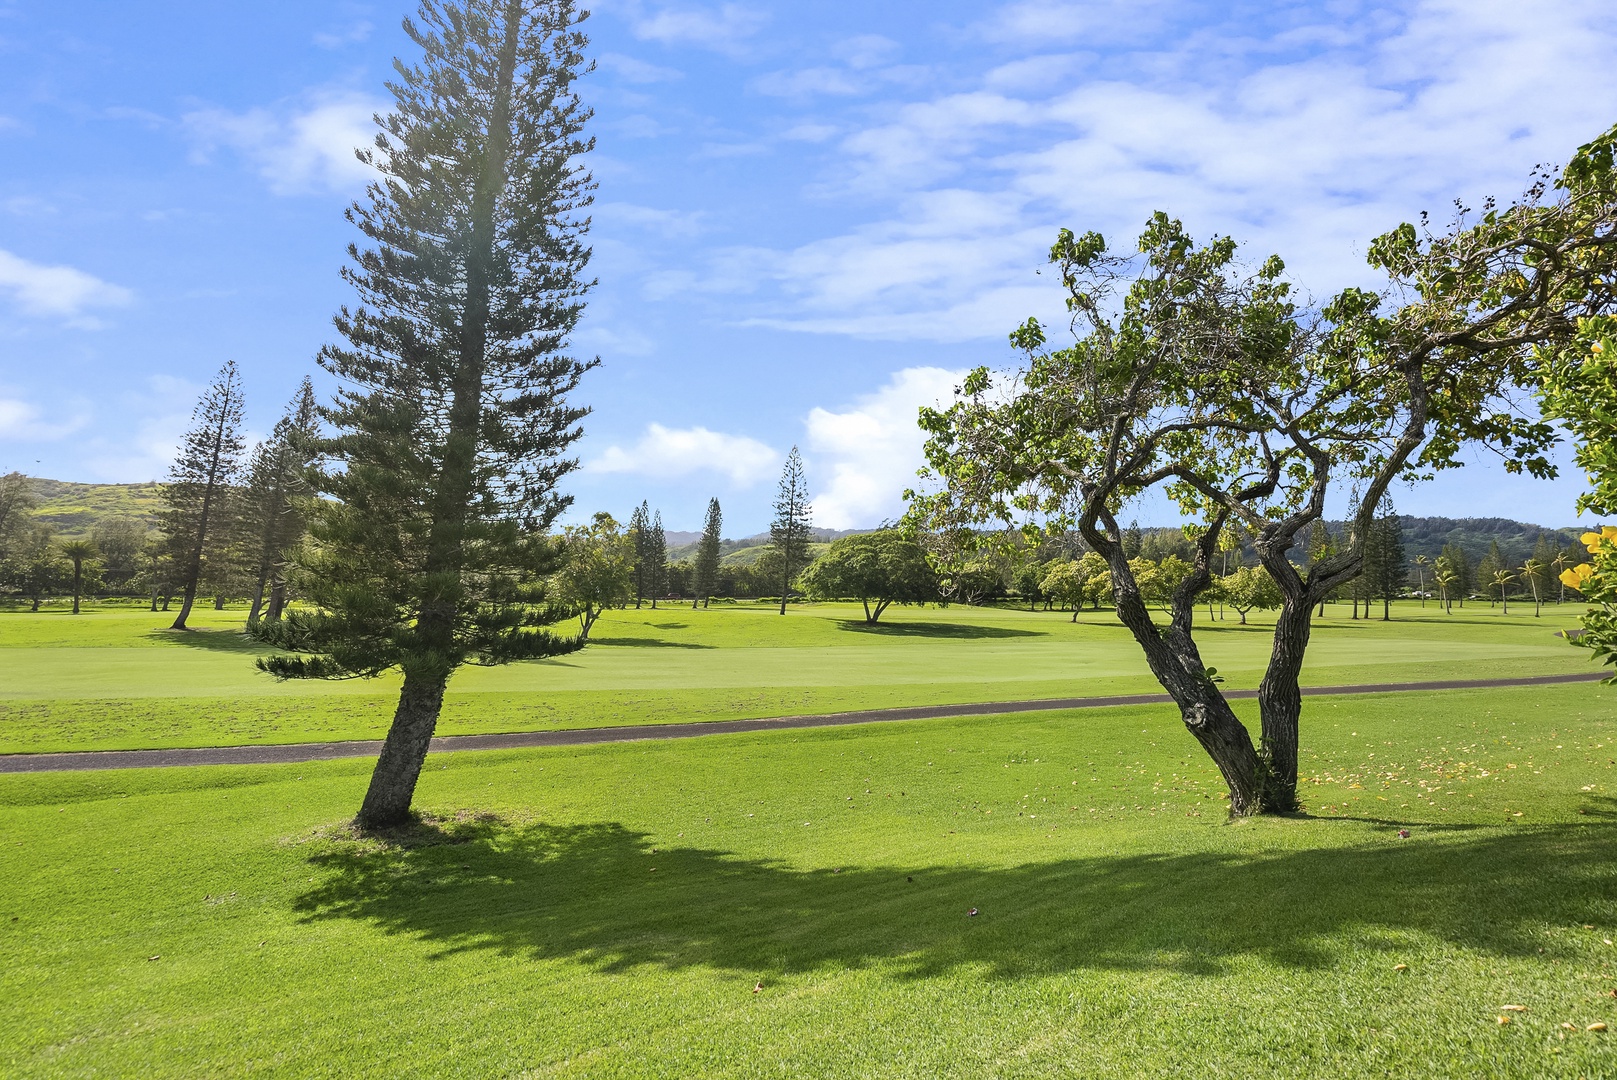 Kahuku Vacation Rentals, Kuilima Estates West #120 - Enjoy peaceful moments looking out at the mountains and golf course